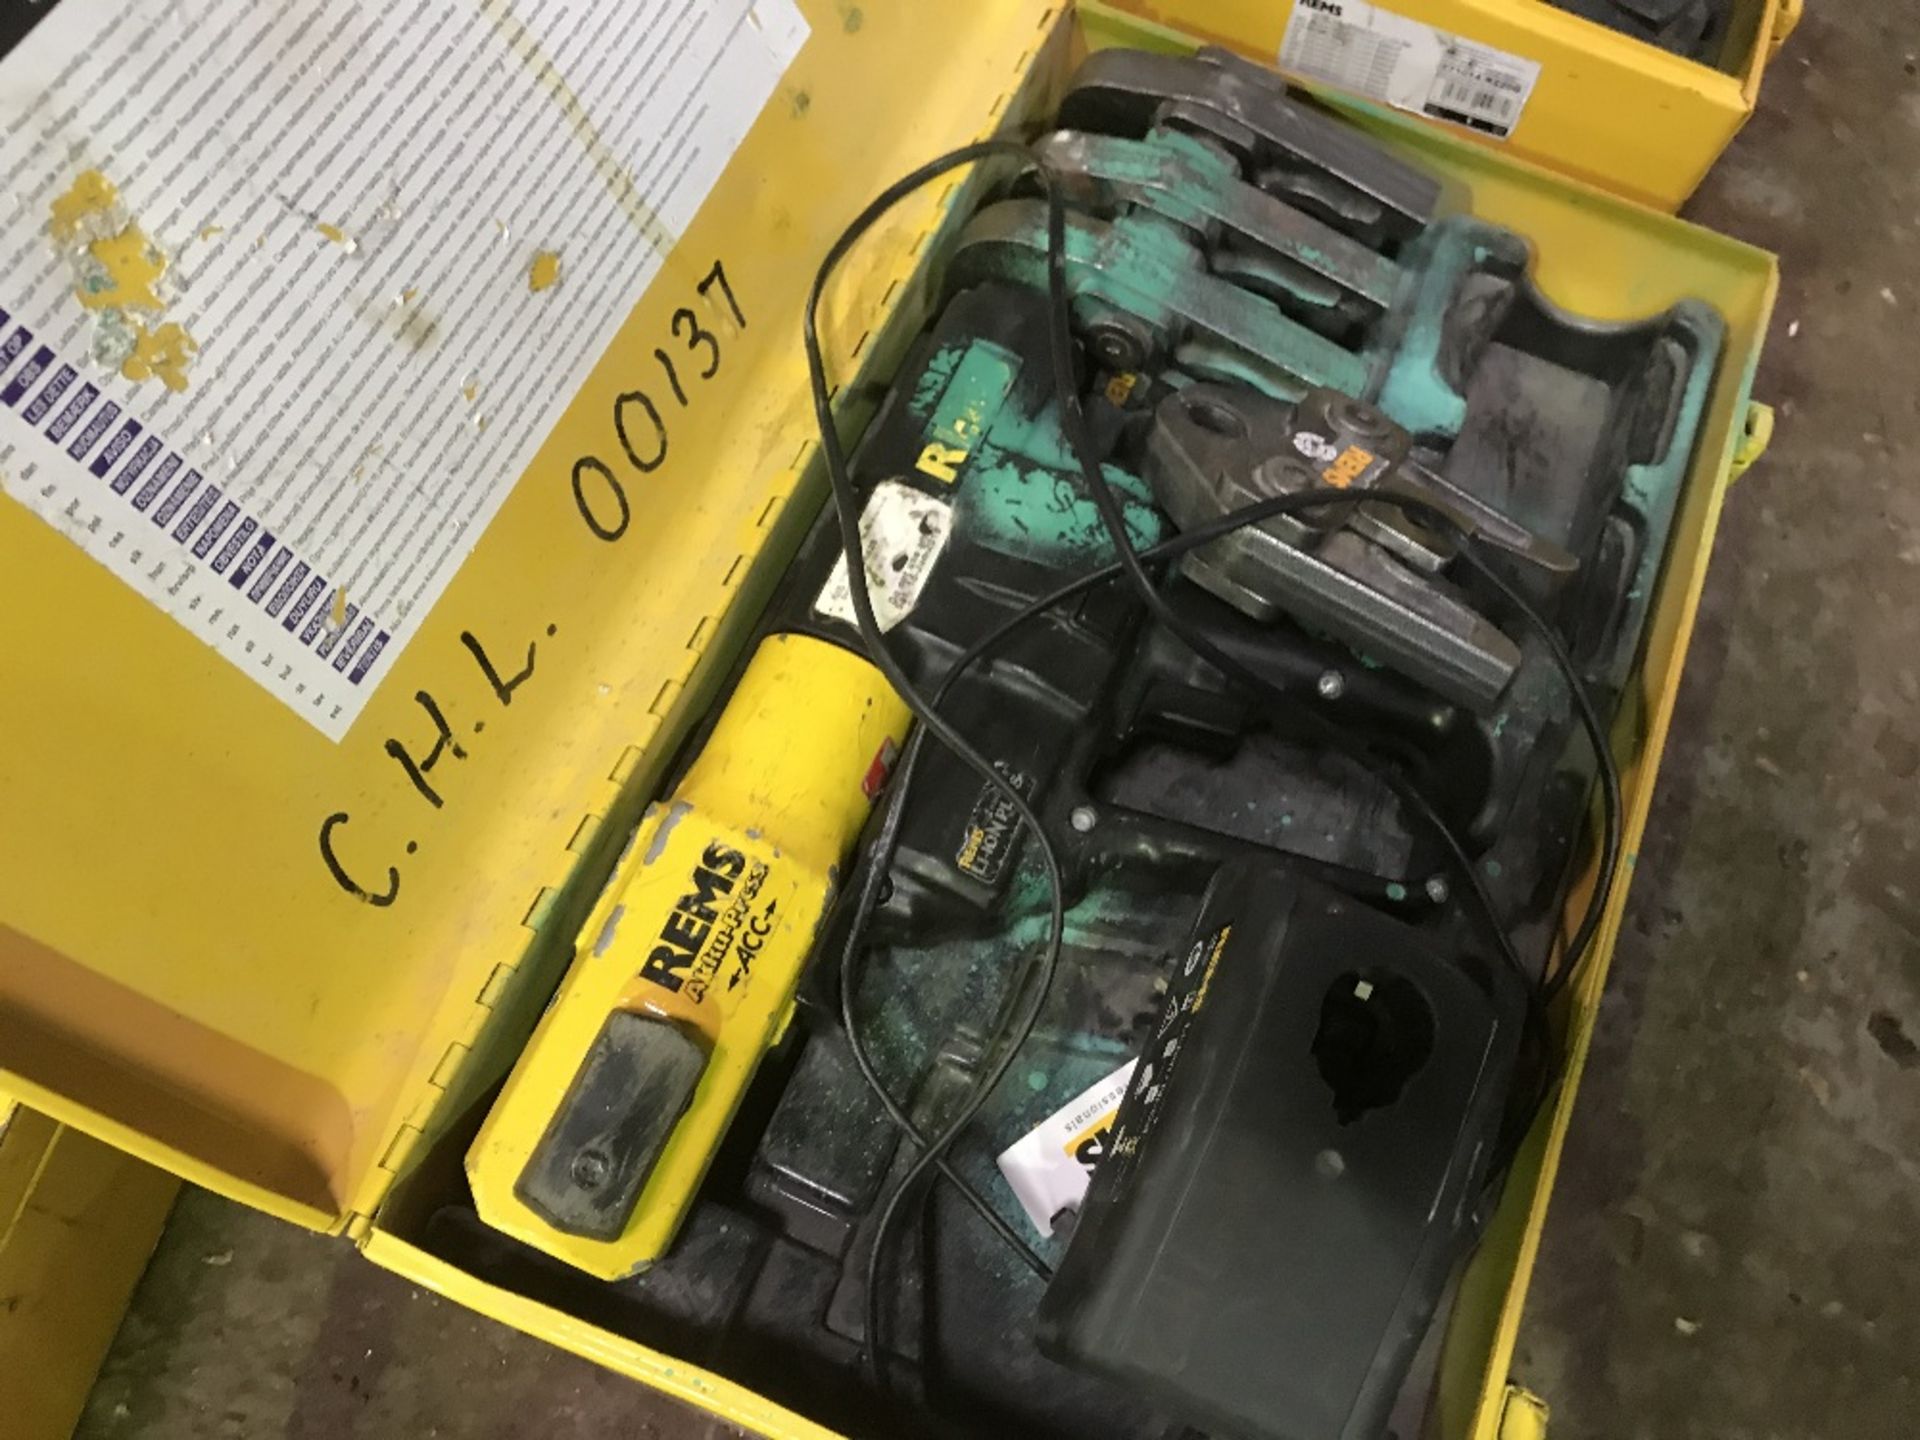 REMS BATTERY POWERED CRIMPER AND ASSOCIATED TOOLING AS SHOWN DIRECT FROM TRAINING SCHOOL - Image 2 of 3